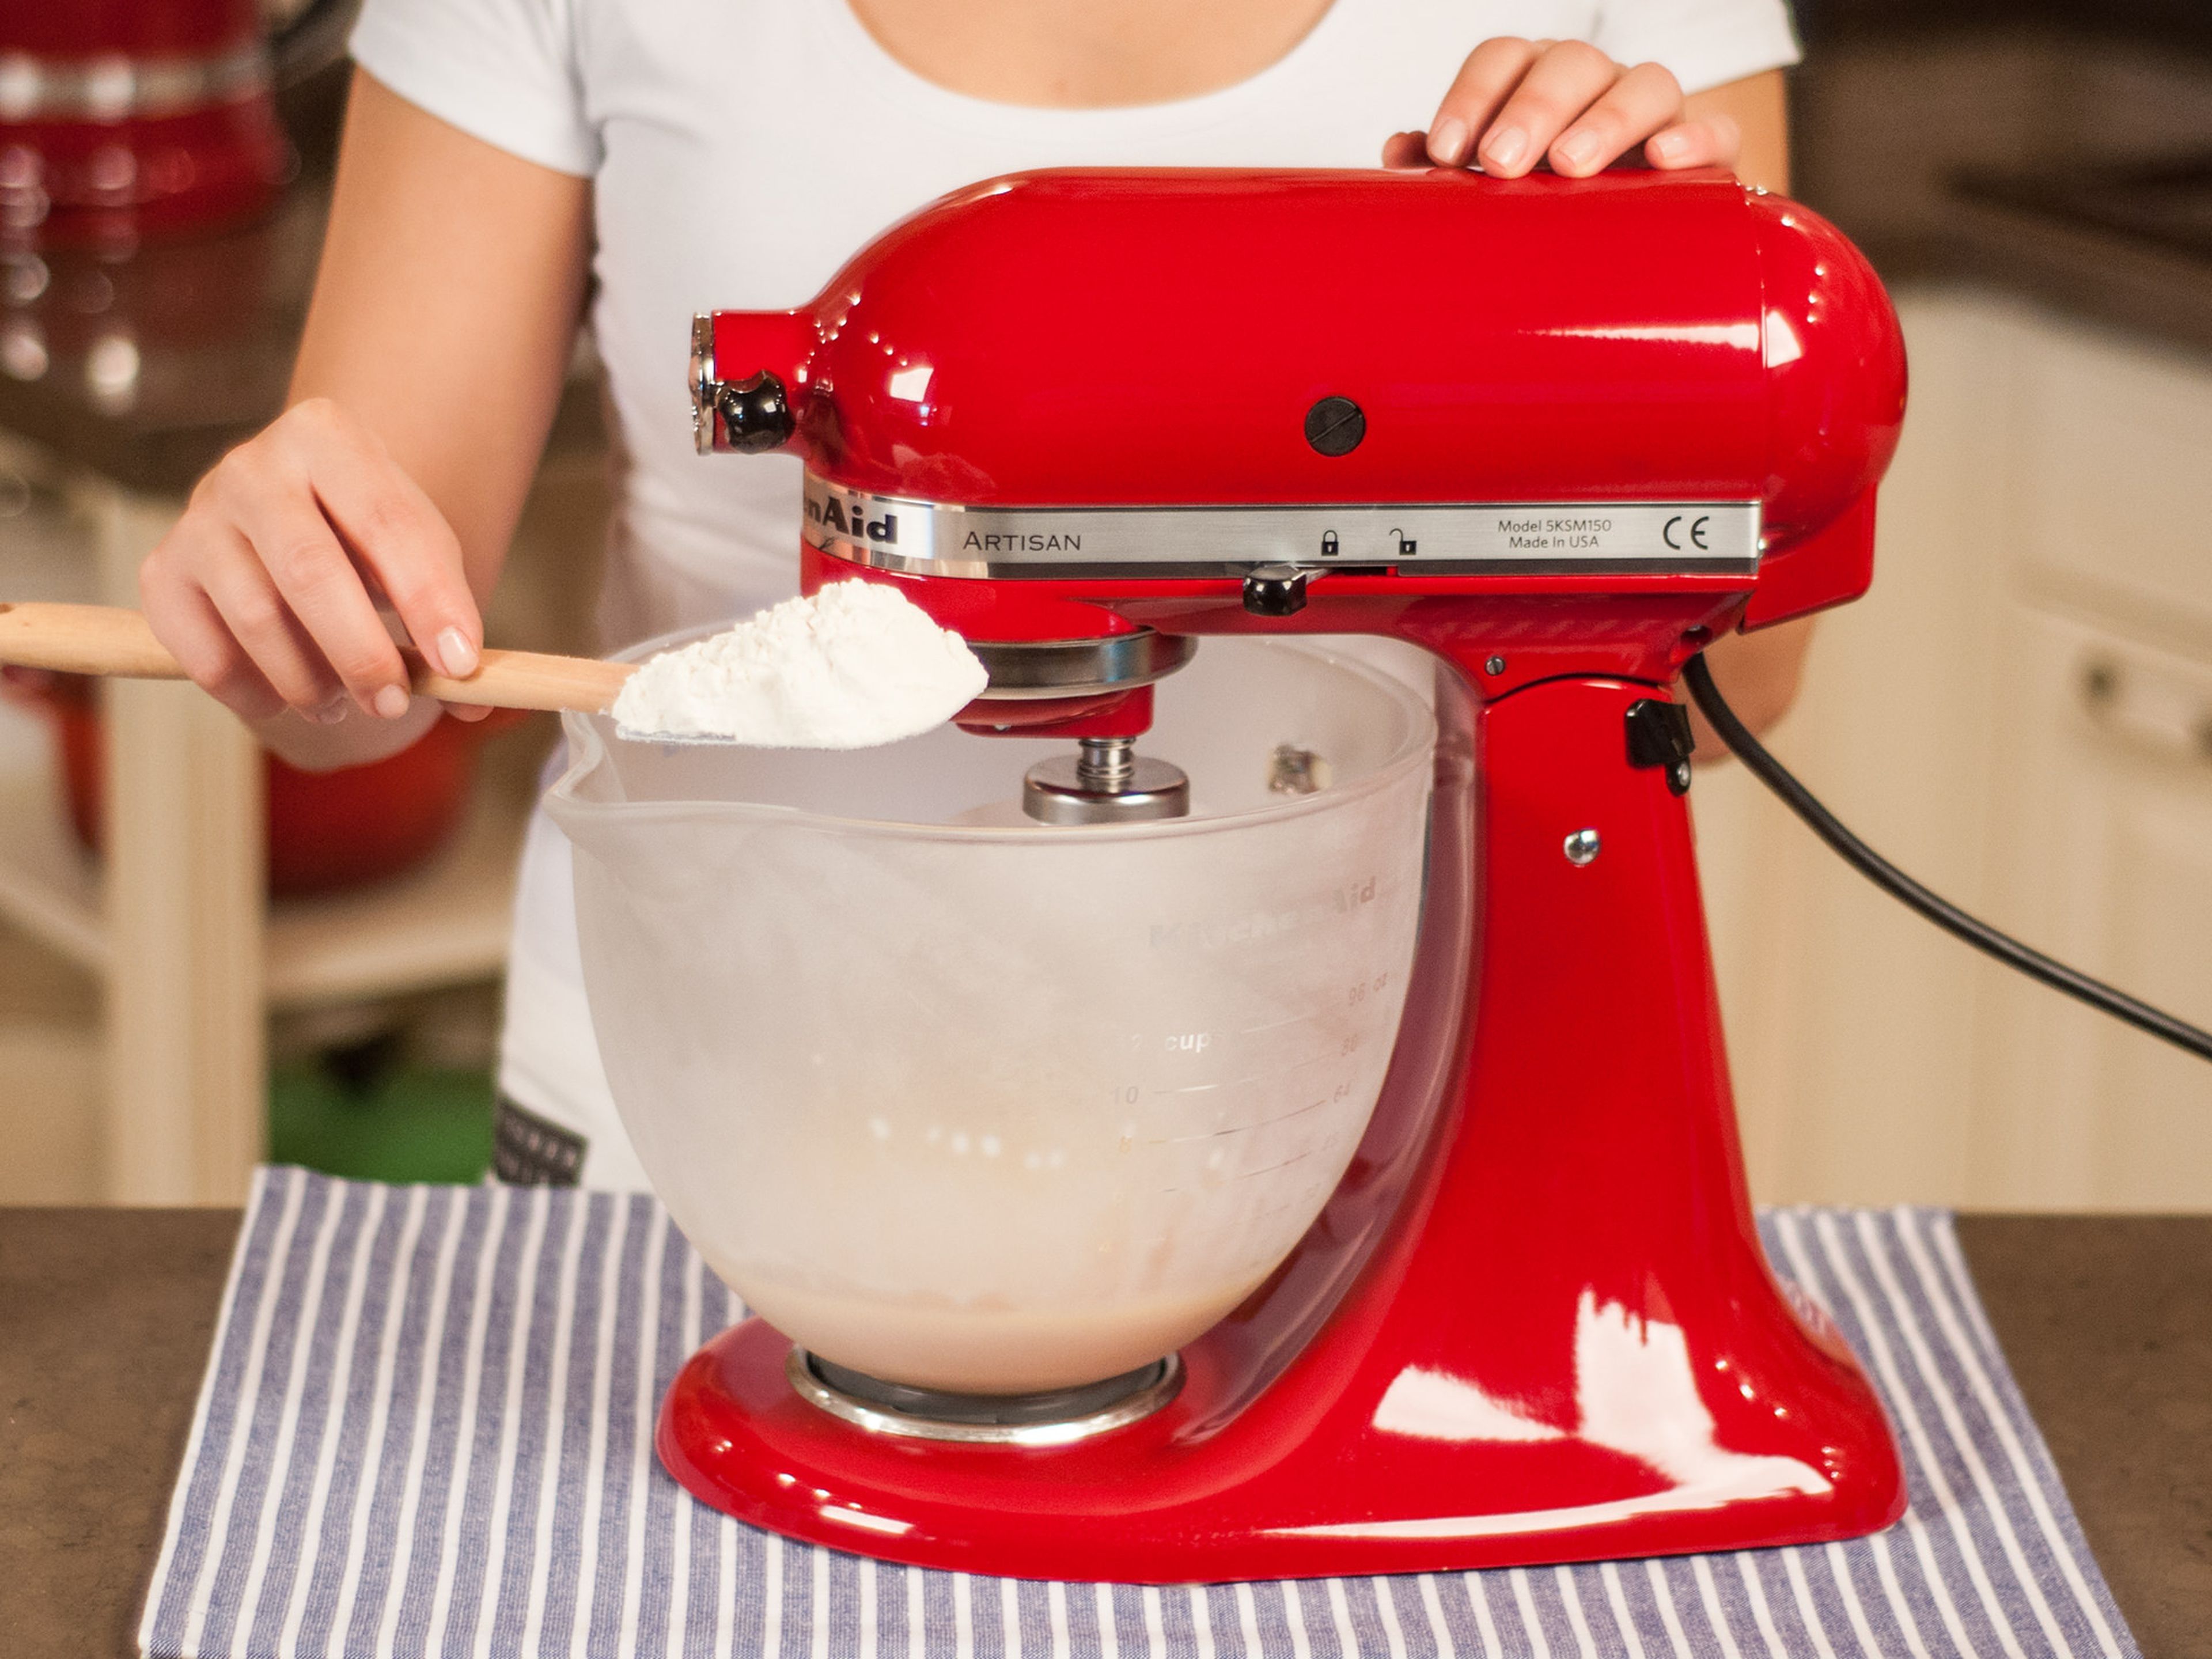 In a standing mixer or with a hand mixer, beat together yeast sponge and parts of the flour.